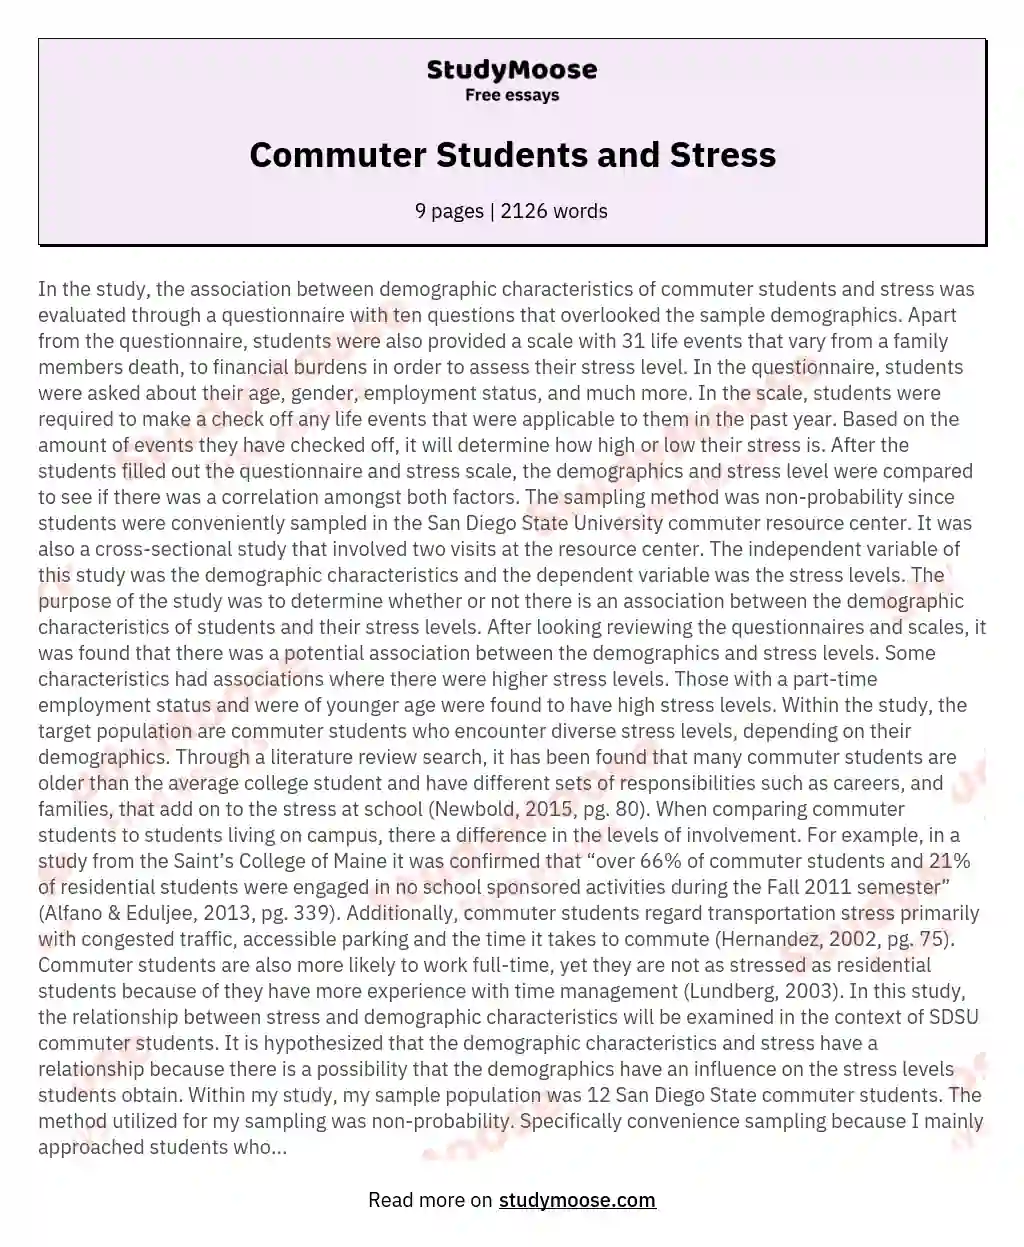 Commuter Students and Stress essay